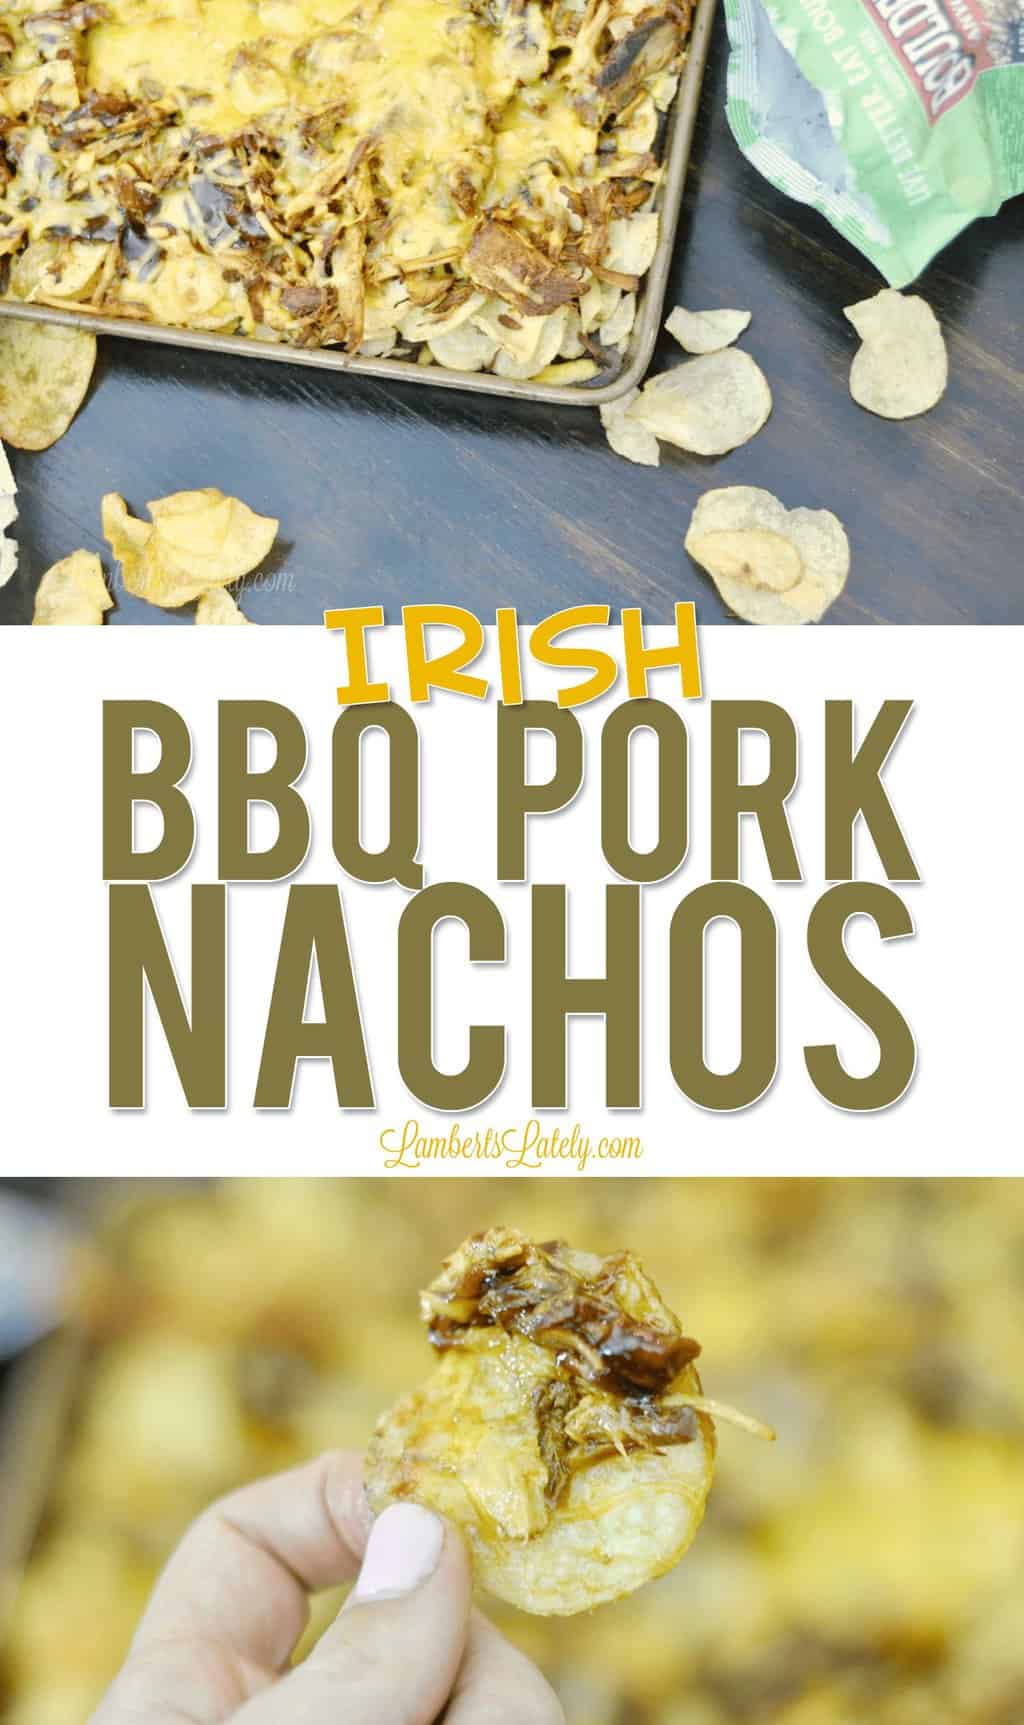 This recipe for Irish BBQ Pork Nachos combines delicious Boulder Canyon kettle cooked potato chips, Instant Pot barbecue pulled pork loin, tangy sauce, and cheddar cheese to make a perfect game day snack/appetizer!